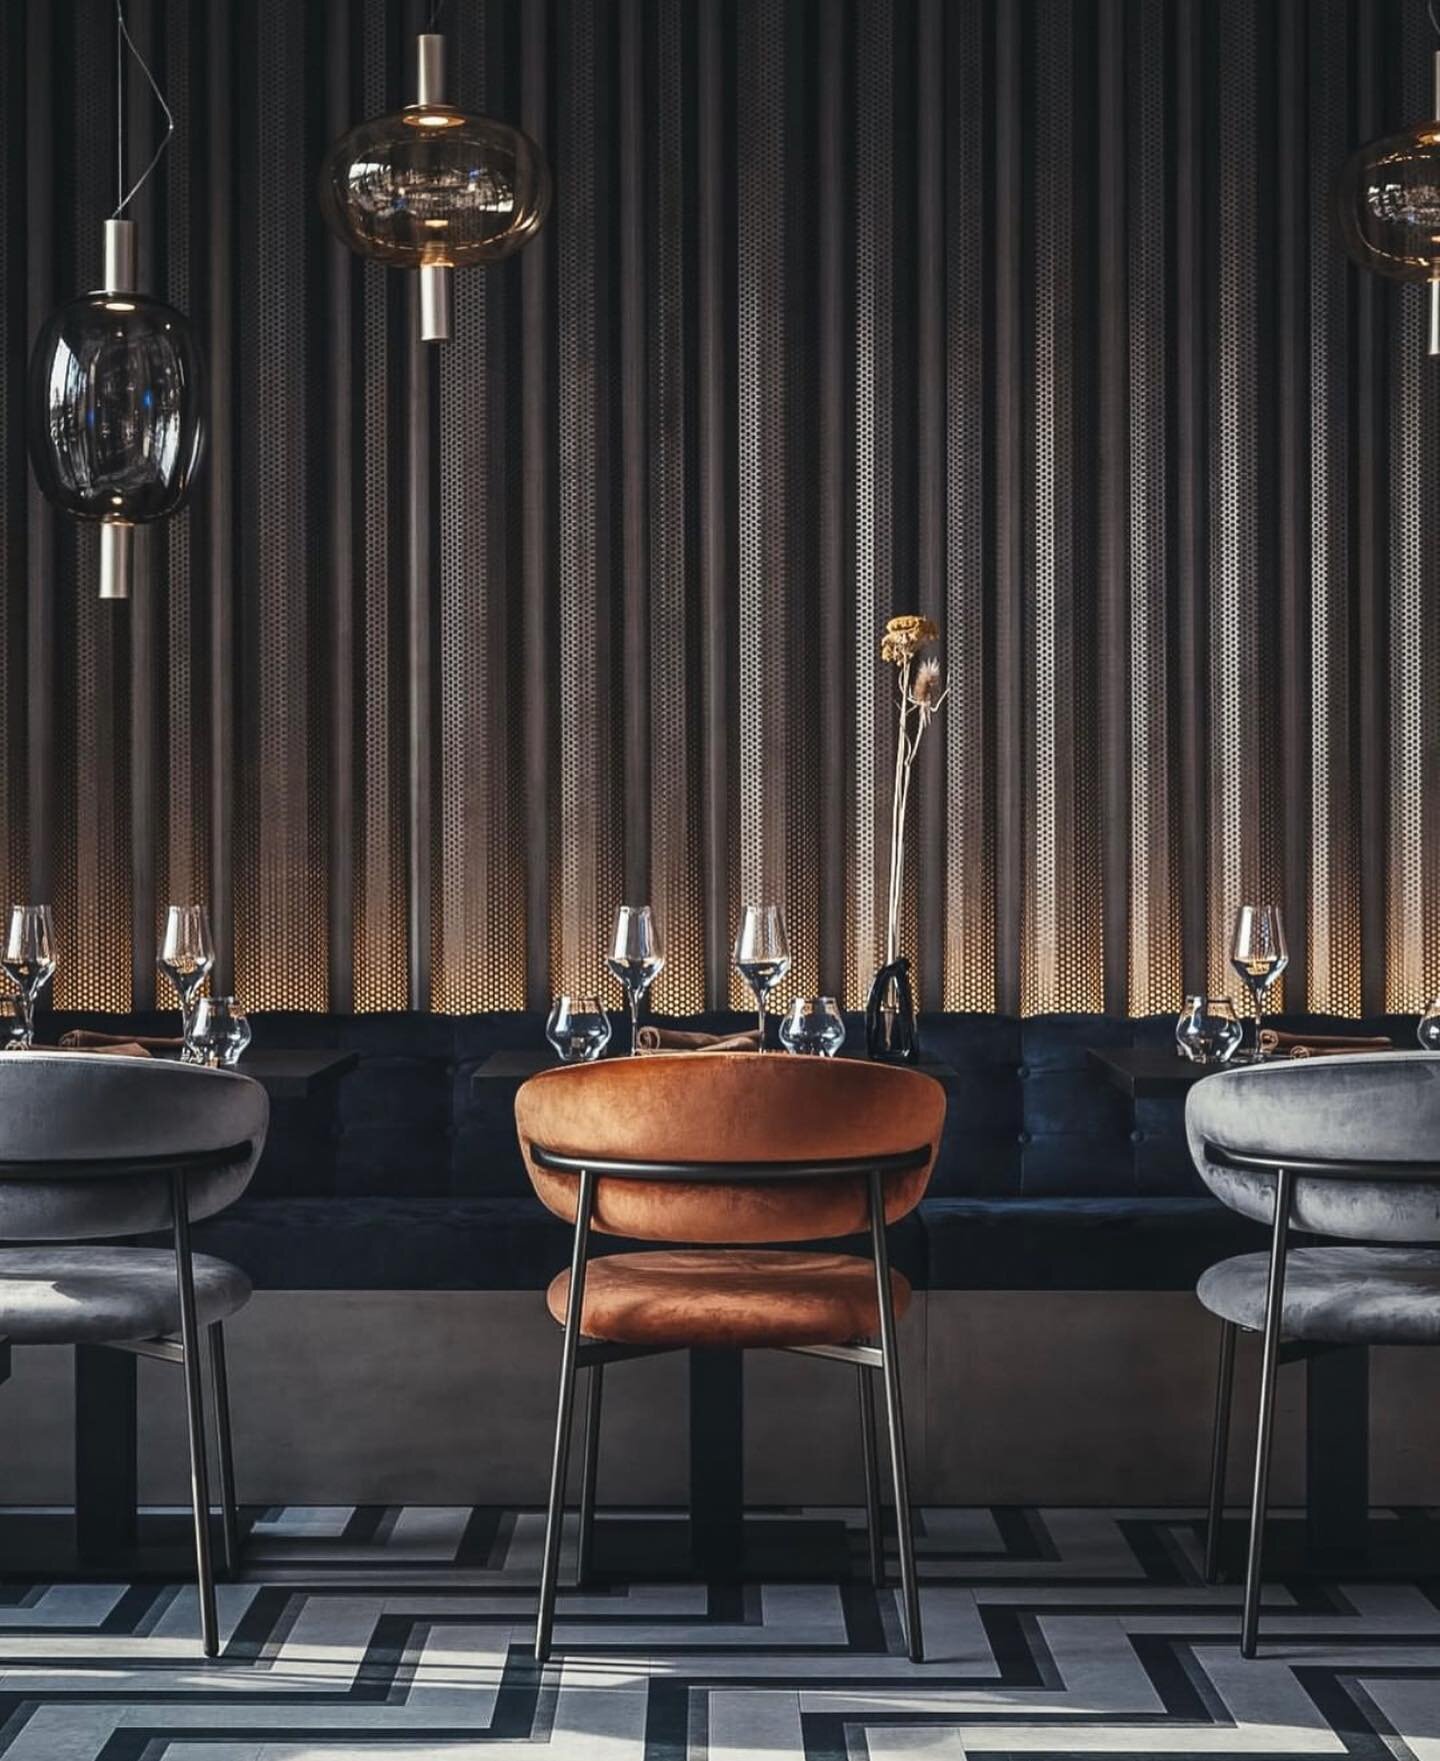 @calligaris_official sets the mood for any meal with their amazing products. Sit down and stay awhile.

#denver #colorado #residentaldesign #decor #decorinspo #decorinspiration #furnituredesign #furnituredesigner #showroom #design #designshowroom #de